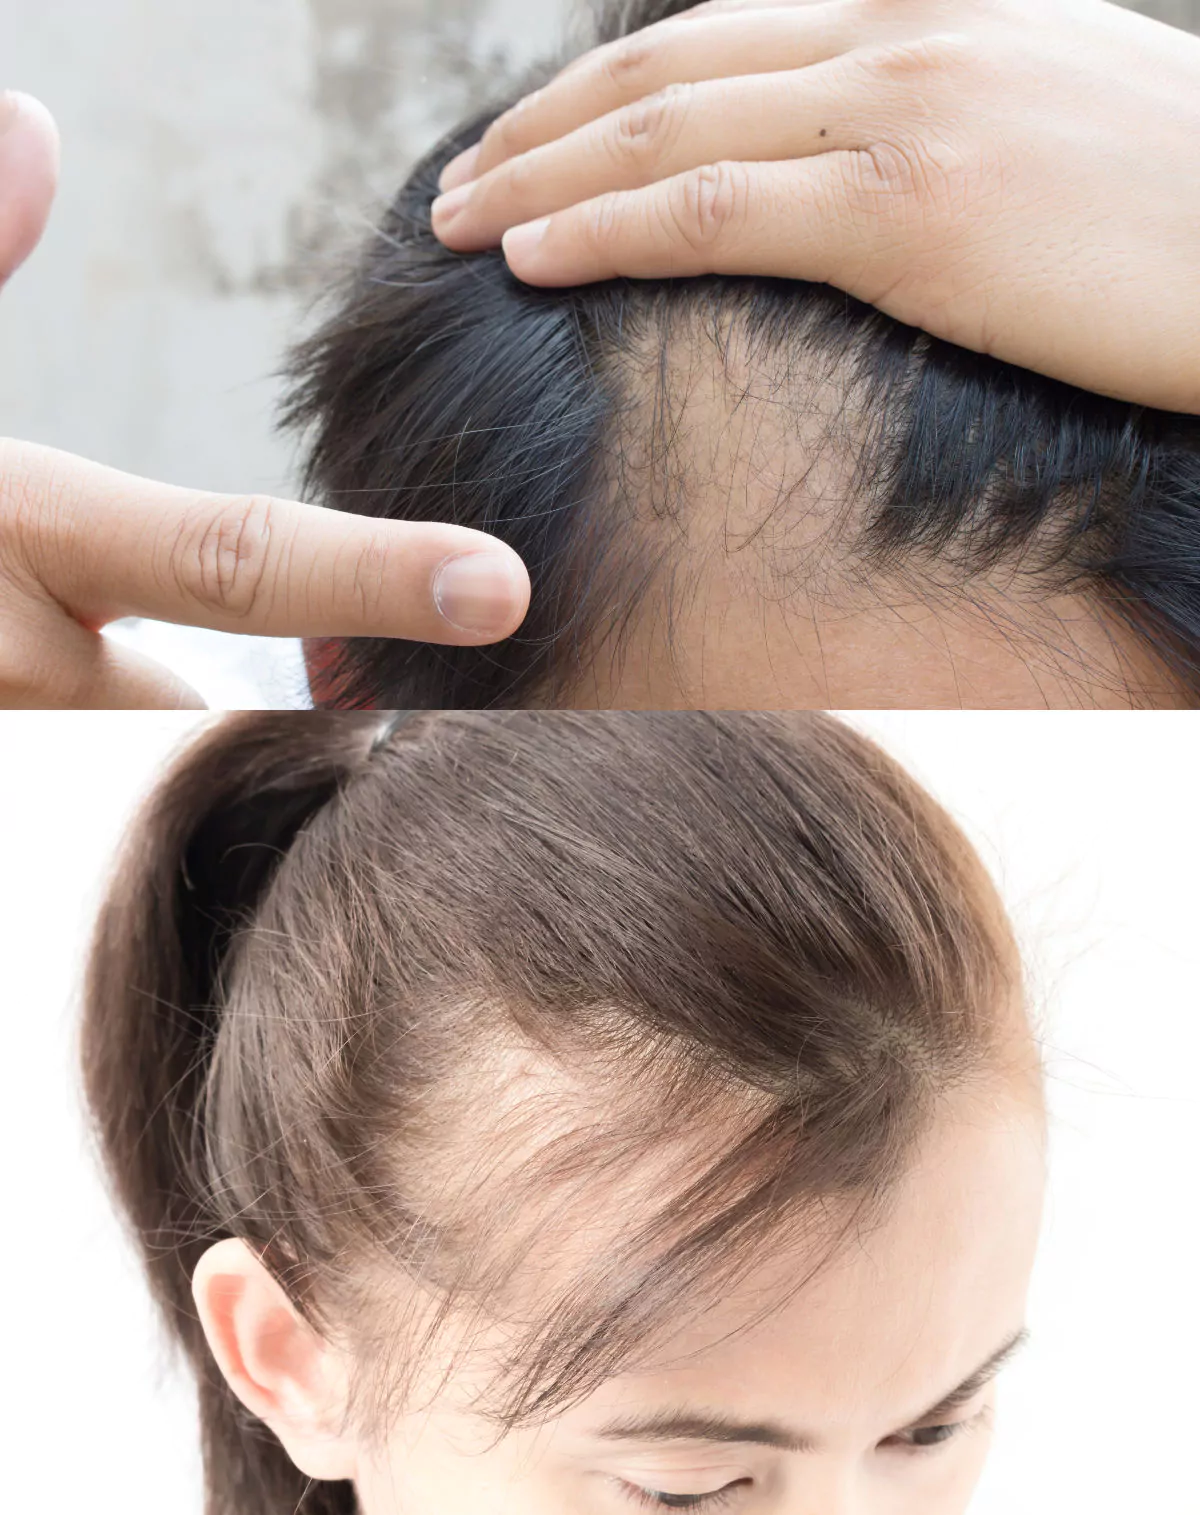 Alopecia Causes, Symptoms, Types and Treatment Options